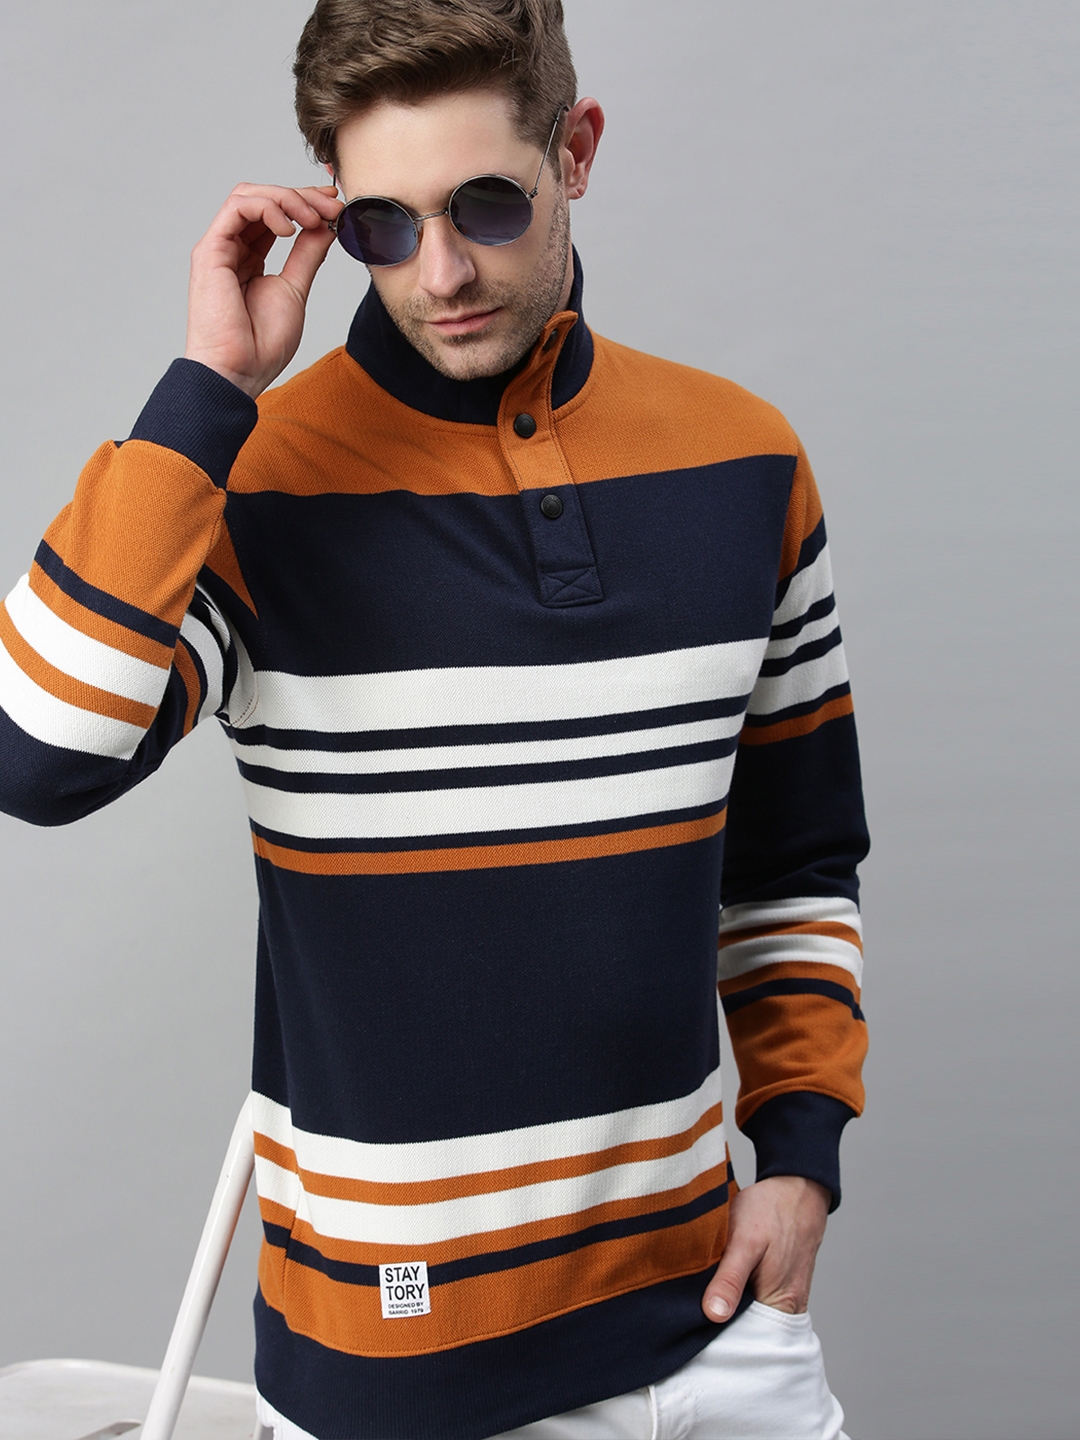 Showoff Men's Cotton Casual Mustard and Navy Striped Sweatshirt